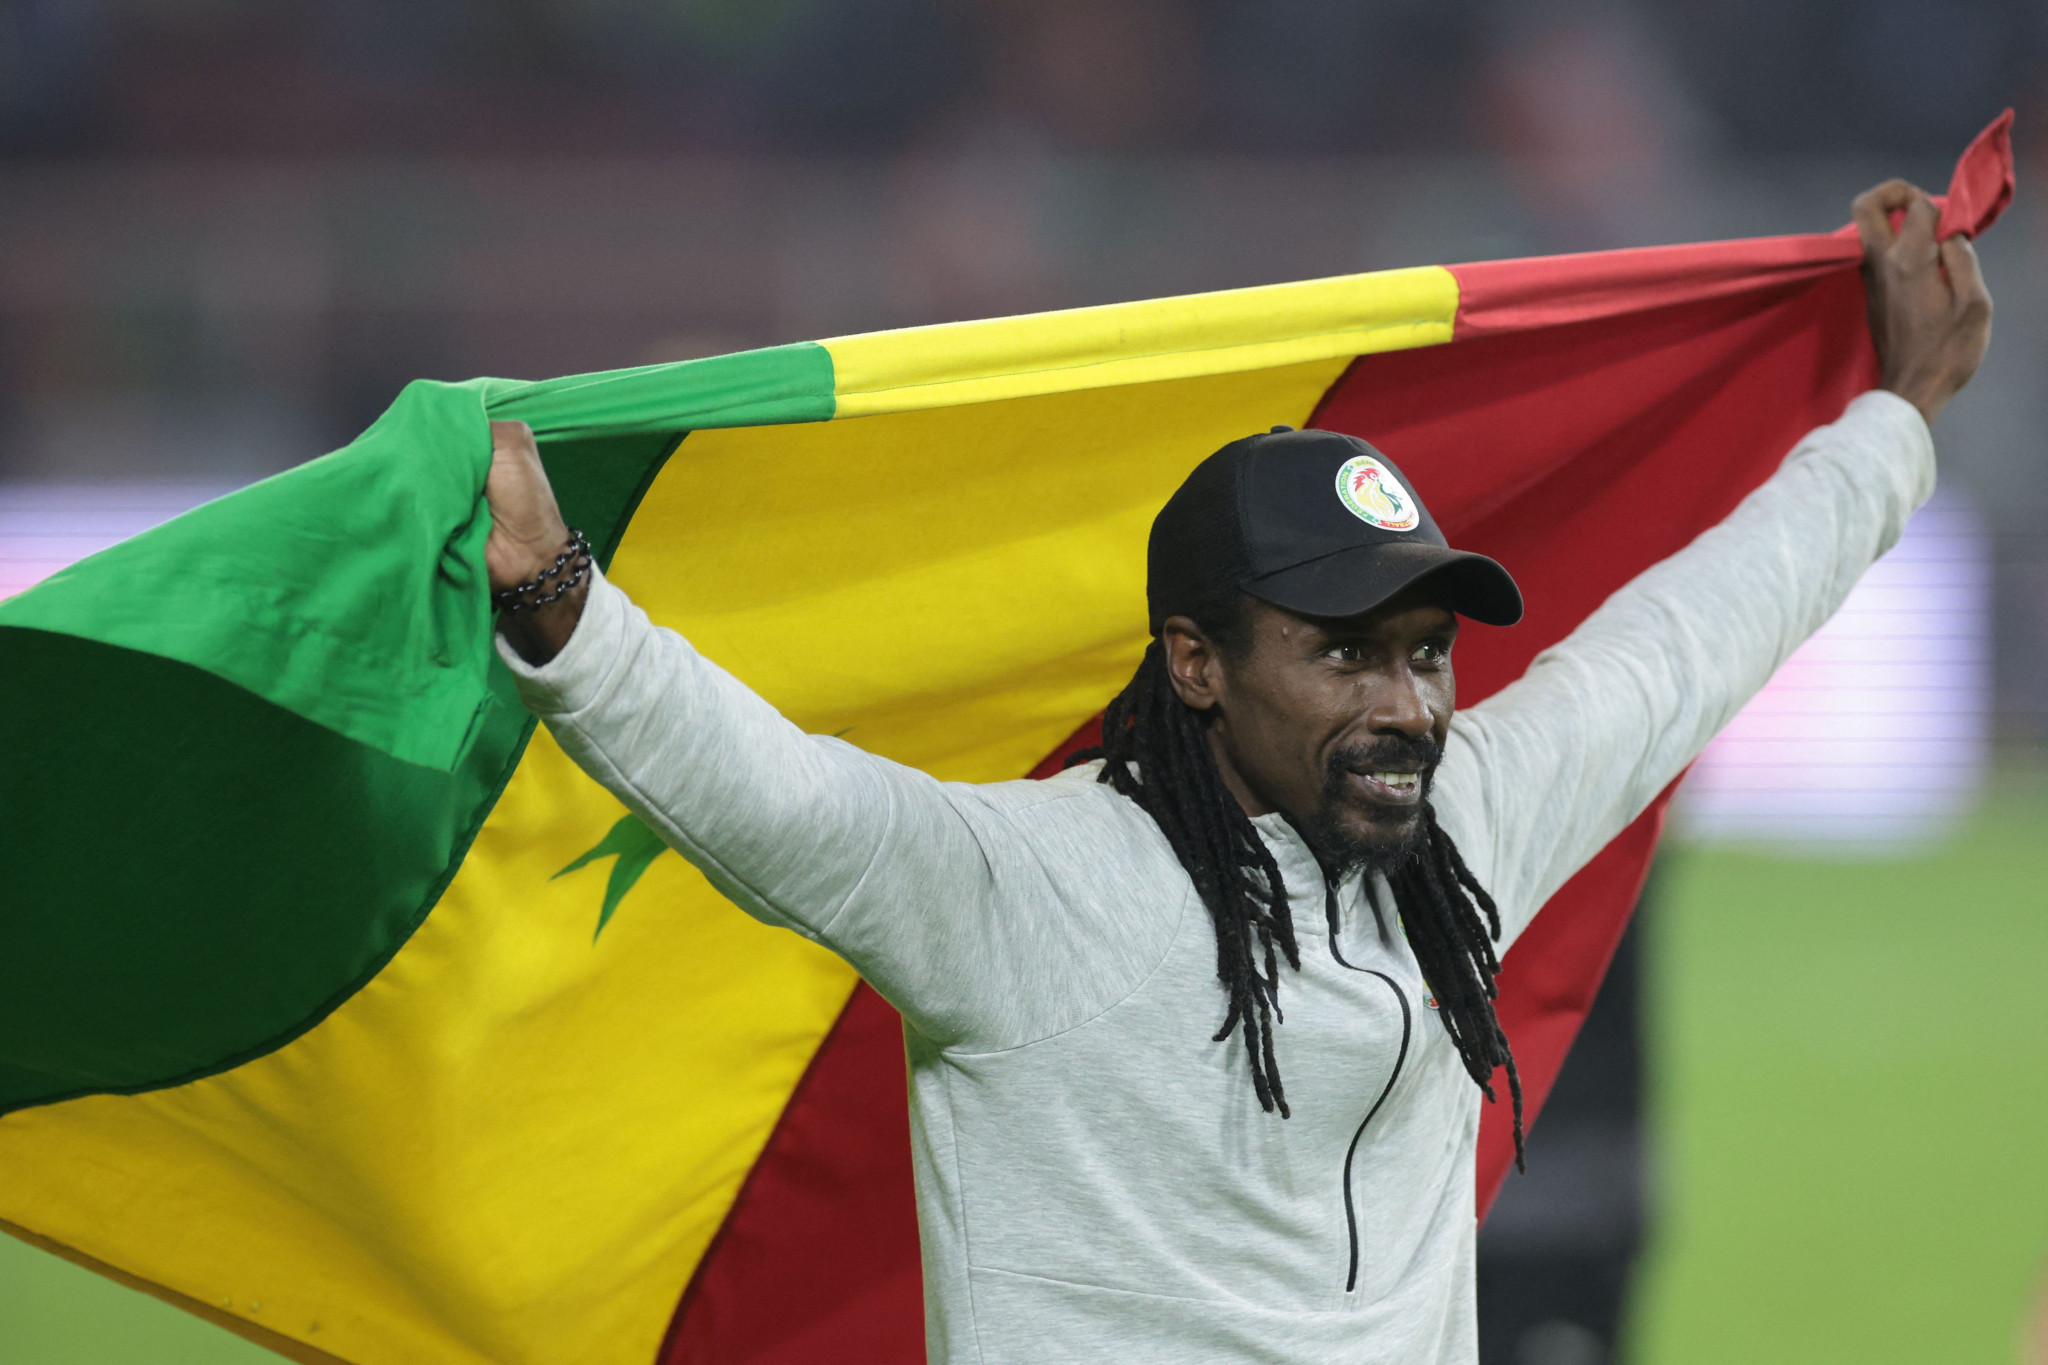 Senegal manager Aliou Cissé captained the country at the 2002 Africa Cup of Nations but missed in the penalty shootout as they lost to Cameroon ©Getty Images